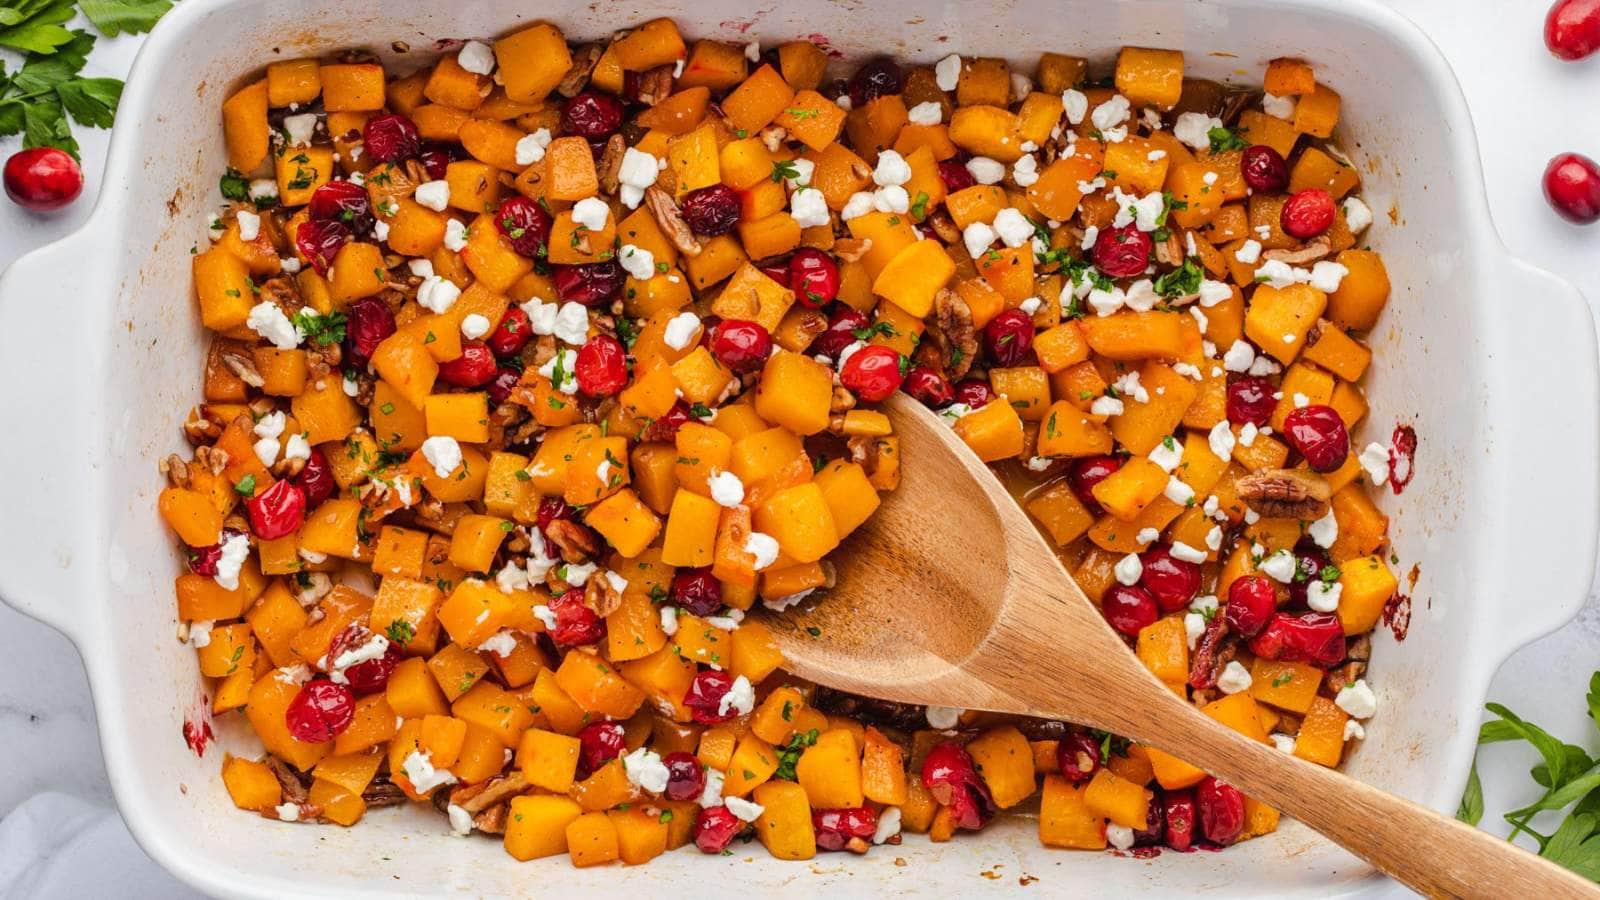  Maple Roasted Butternut Squash with Cranberries recipe by  State of Dinner.